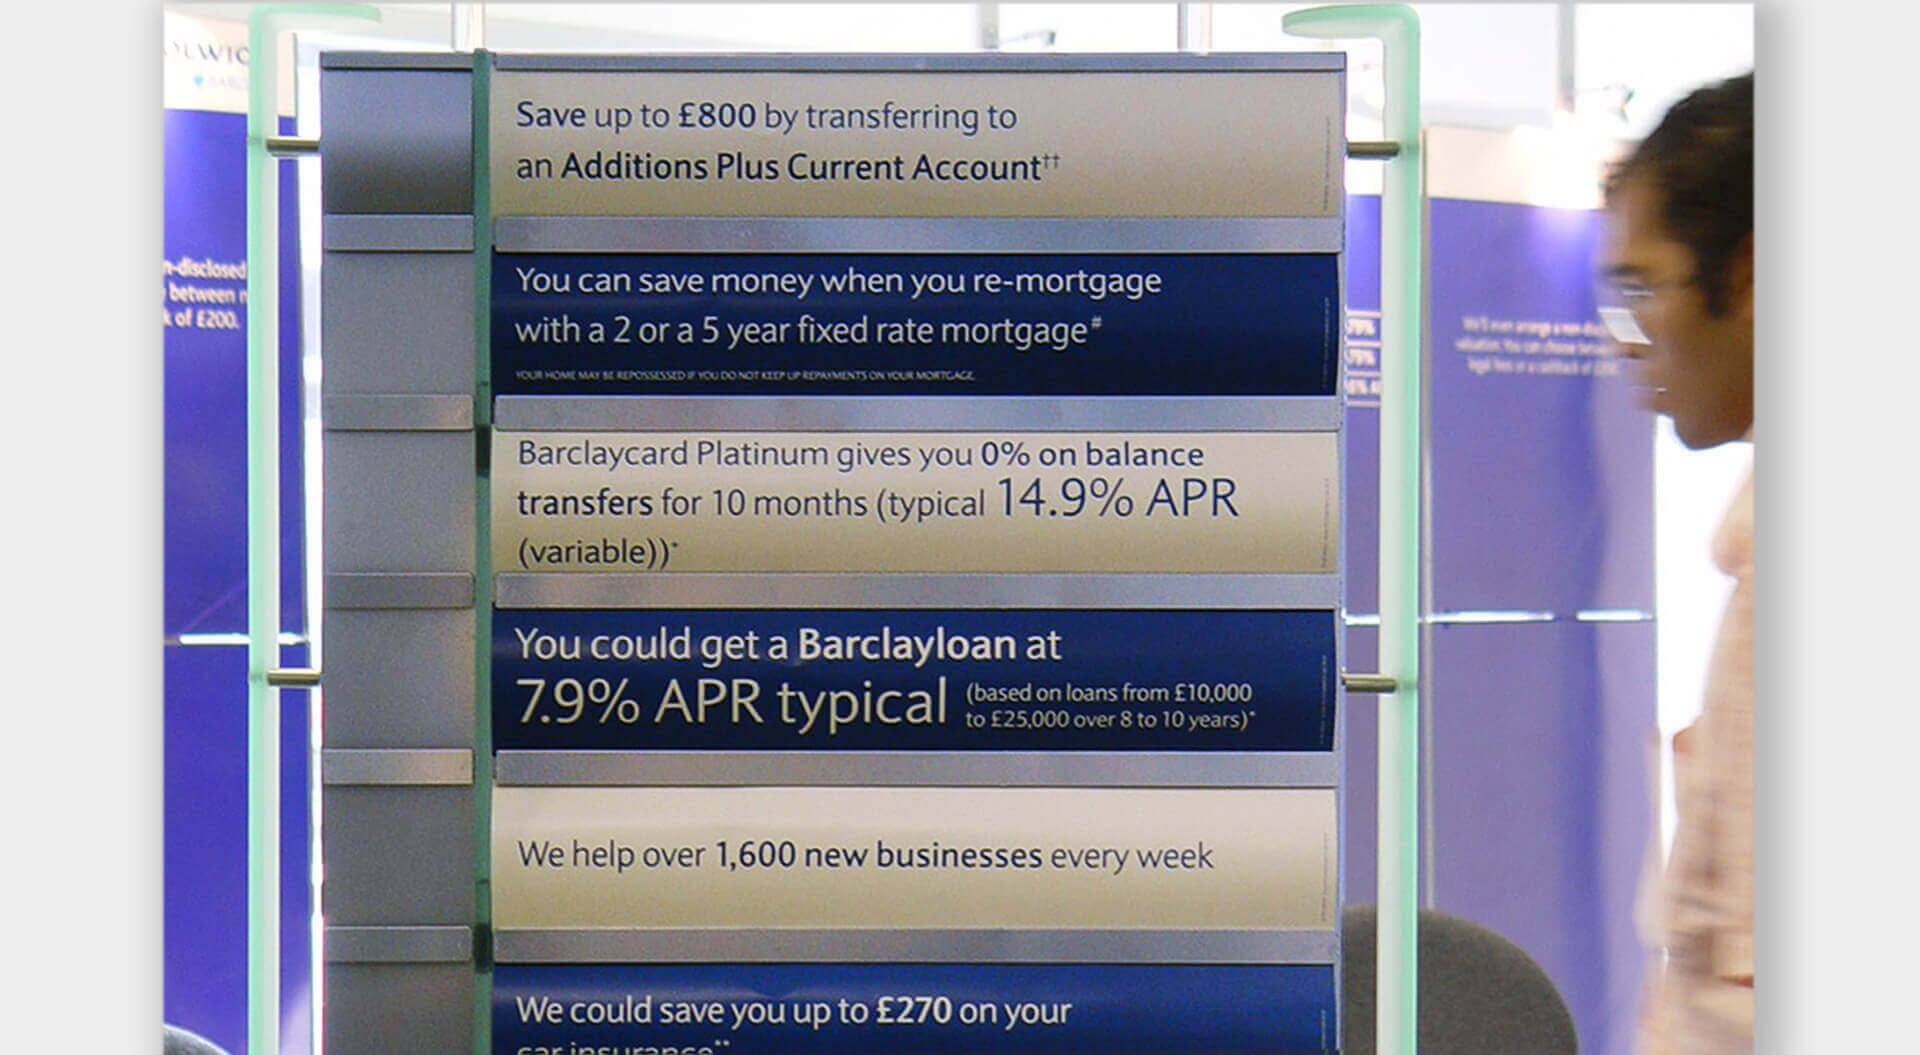 Barclays Bank Information board advertising rates and services